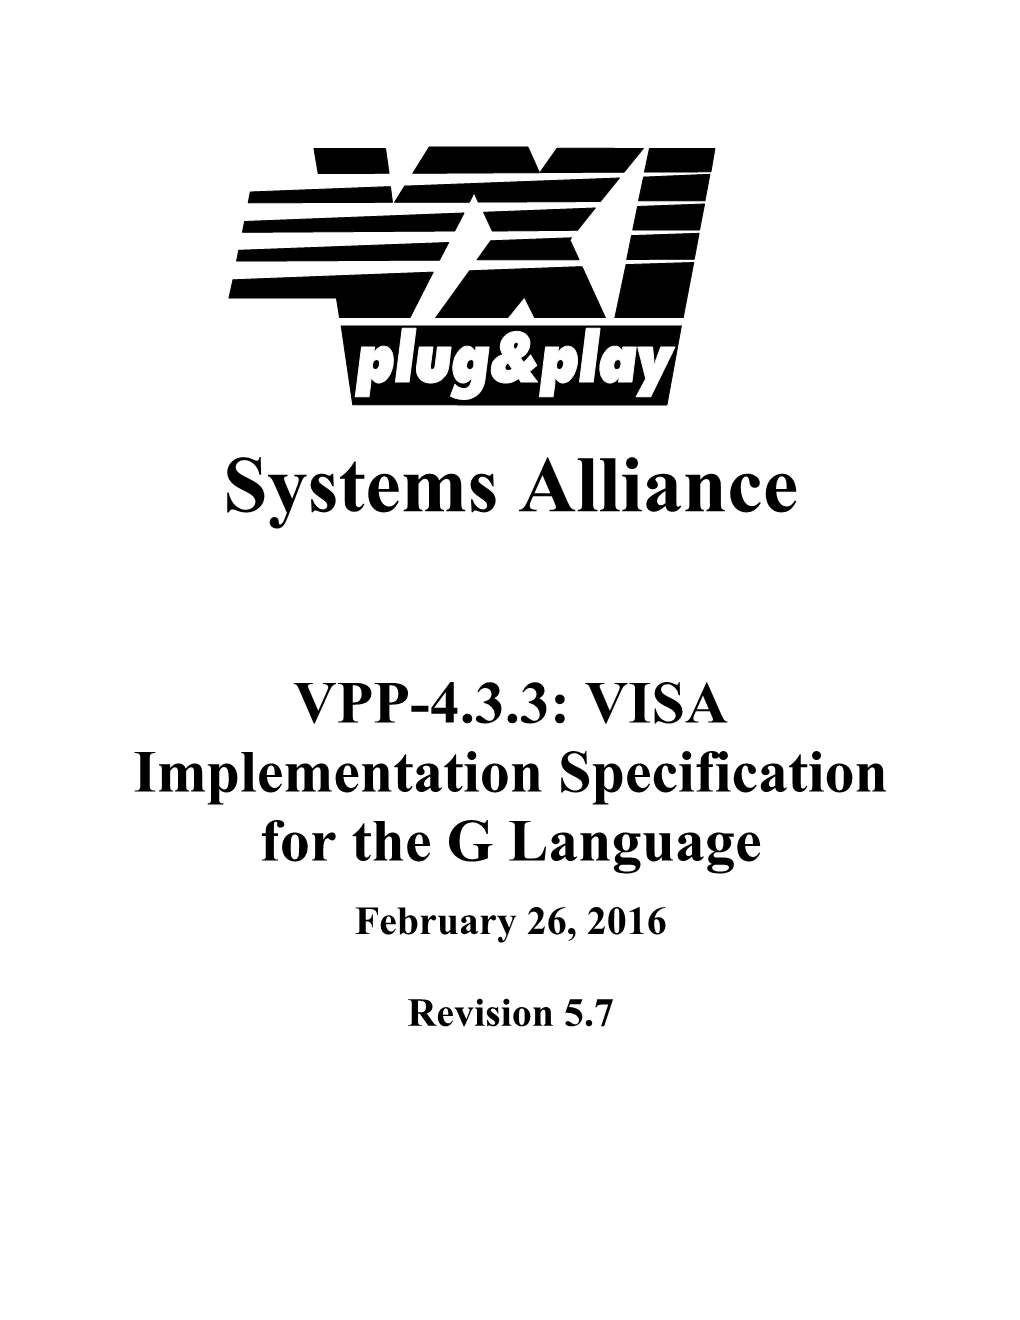 VISA Implementation Specification for Labview